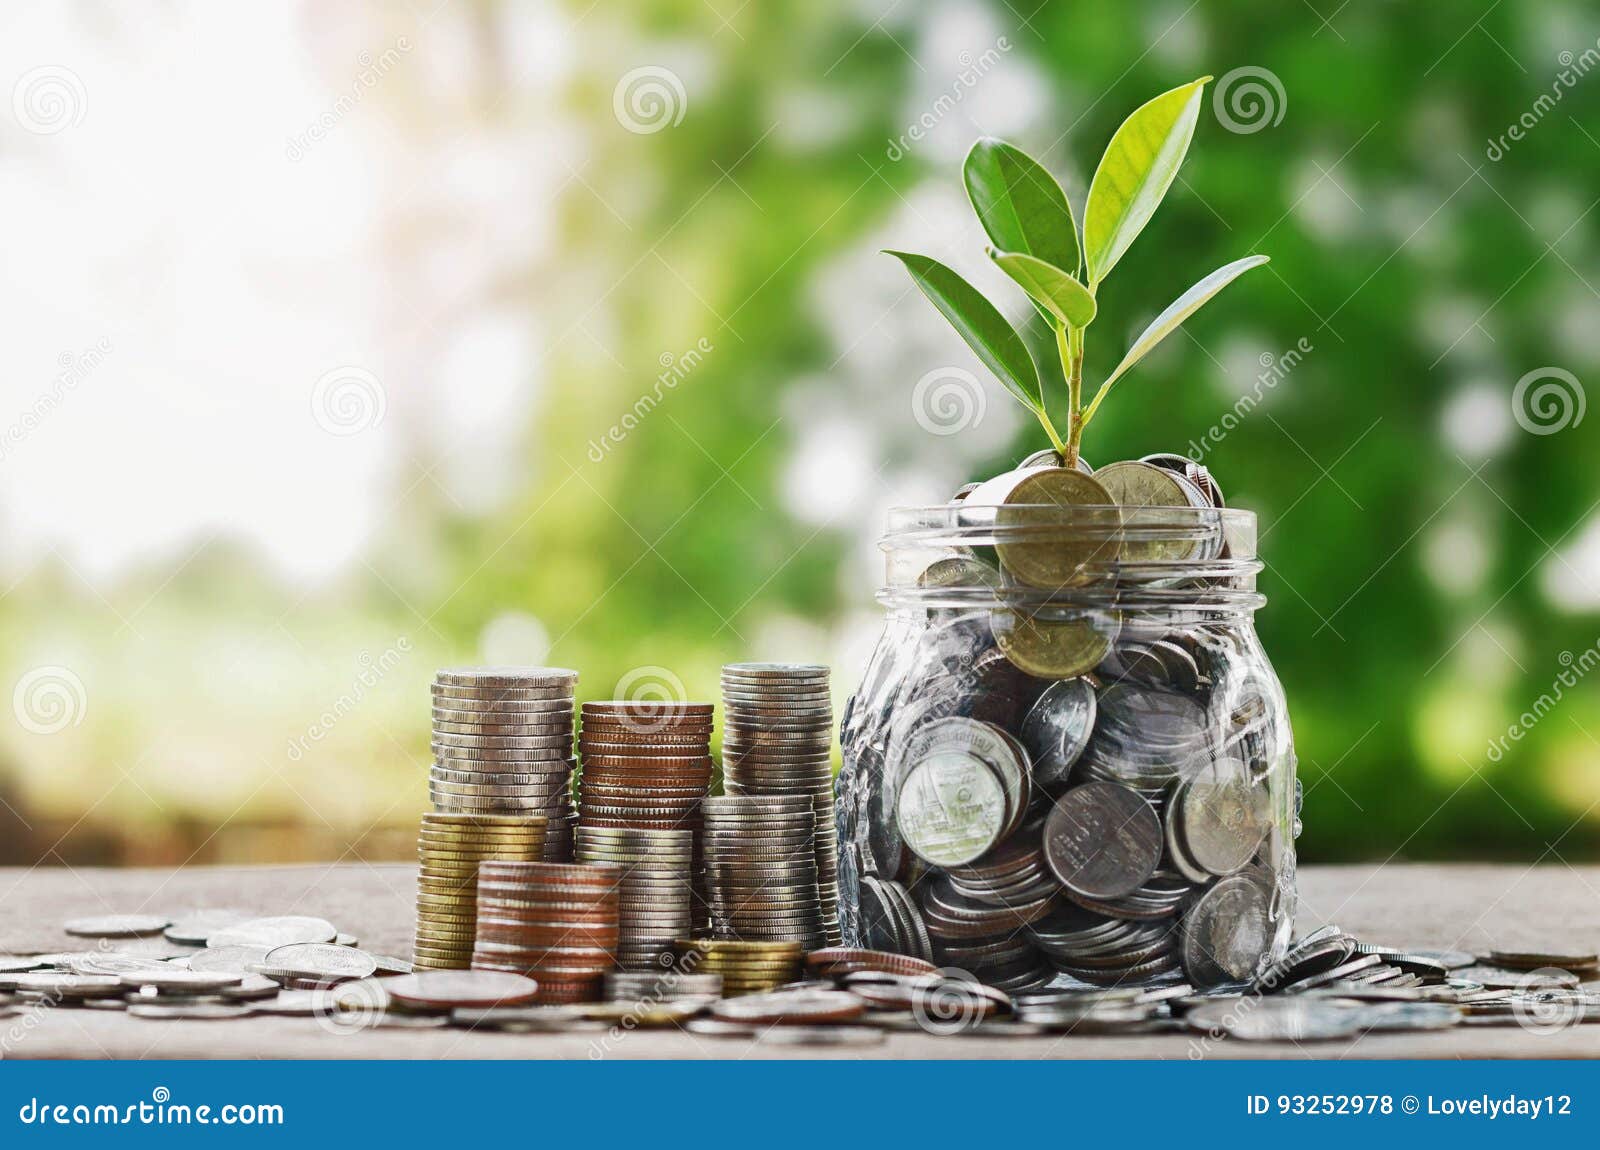 plant growing coins in glass jar with investment financial conc